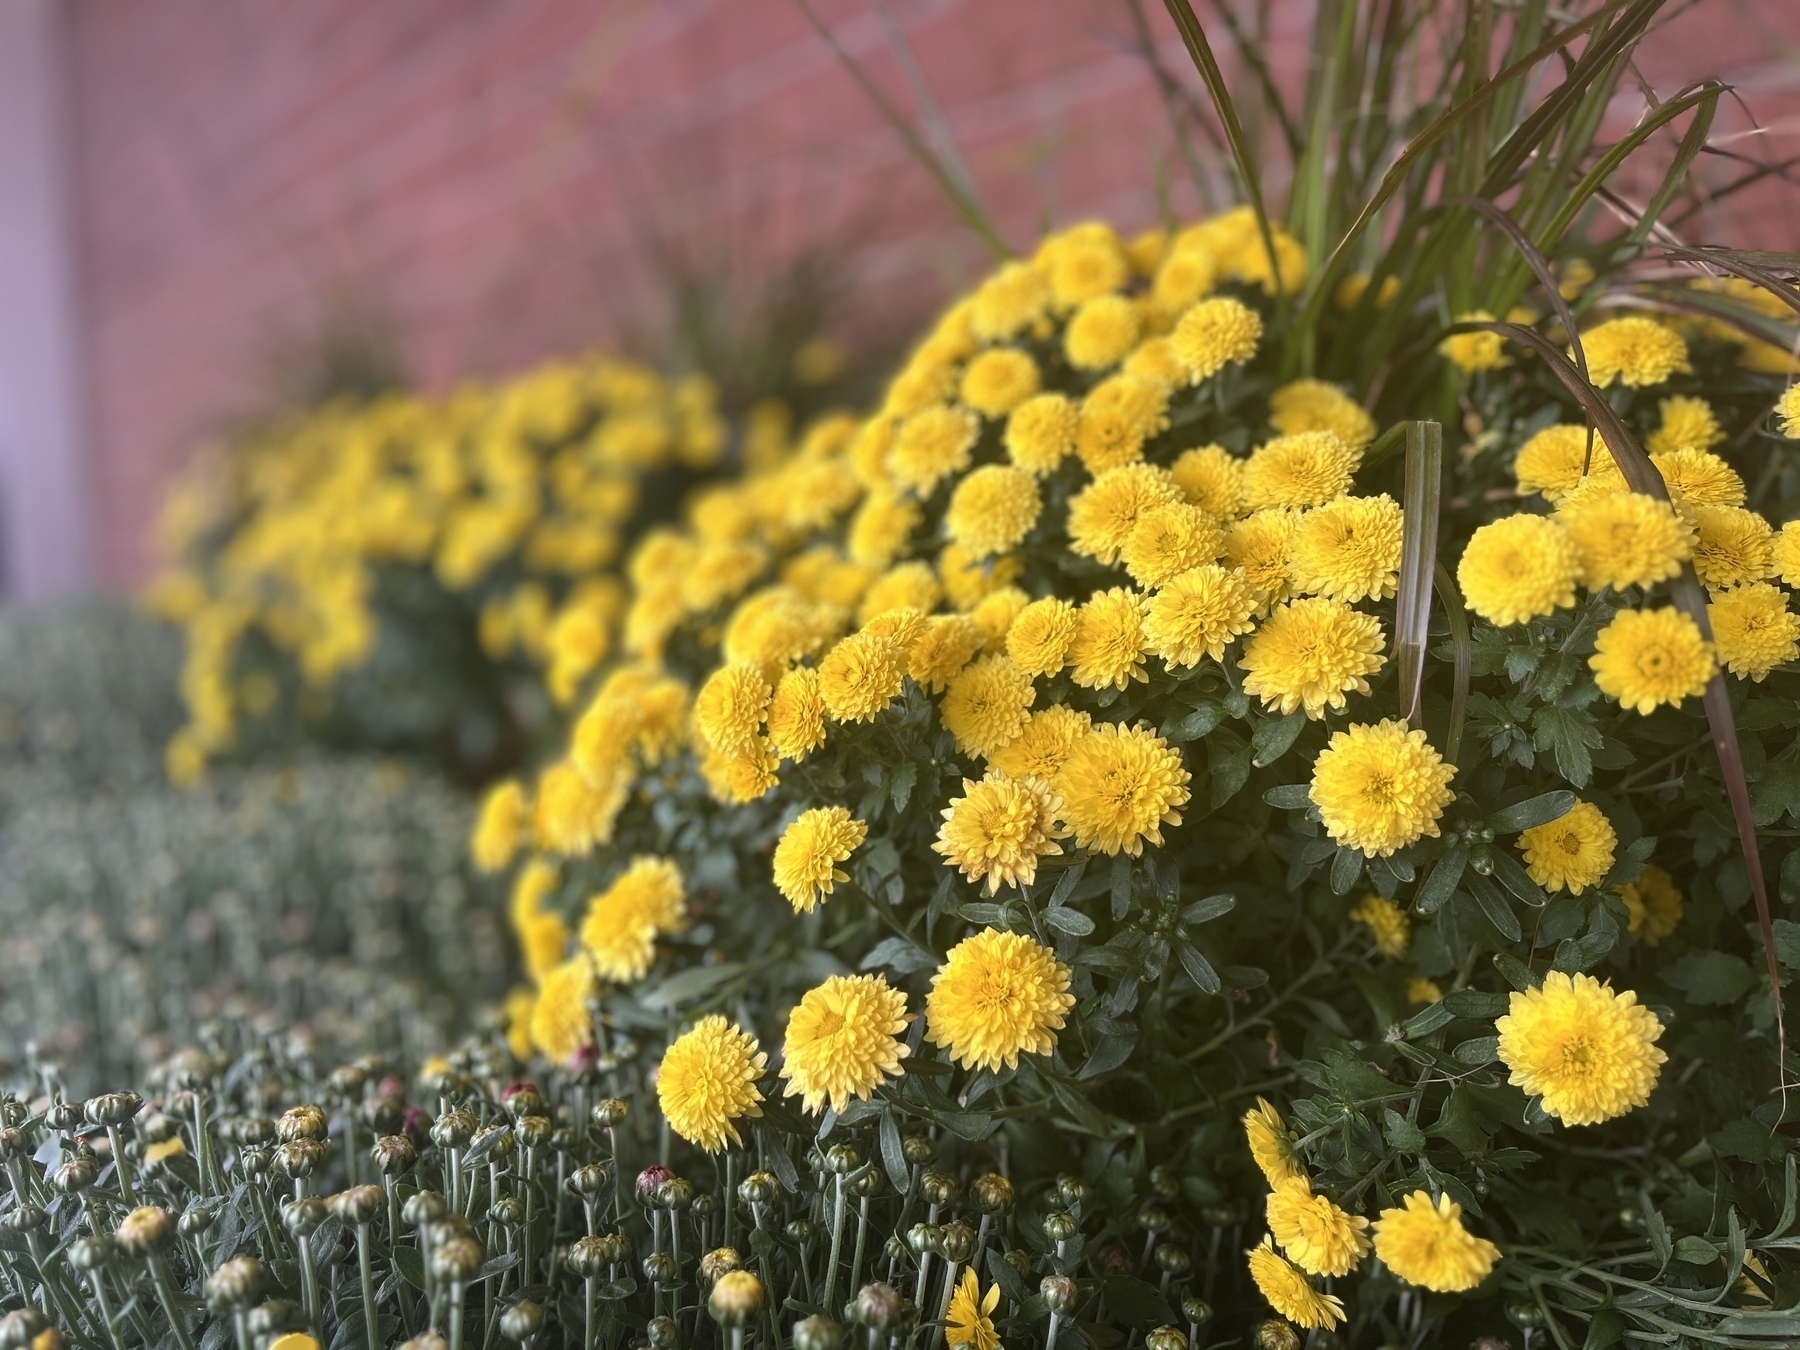 Yellow mums in a pot next to a brick wall